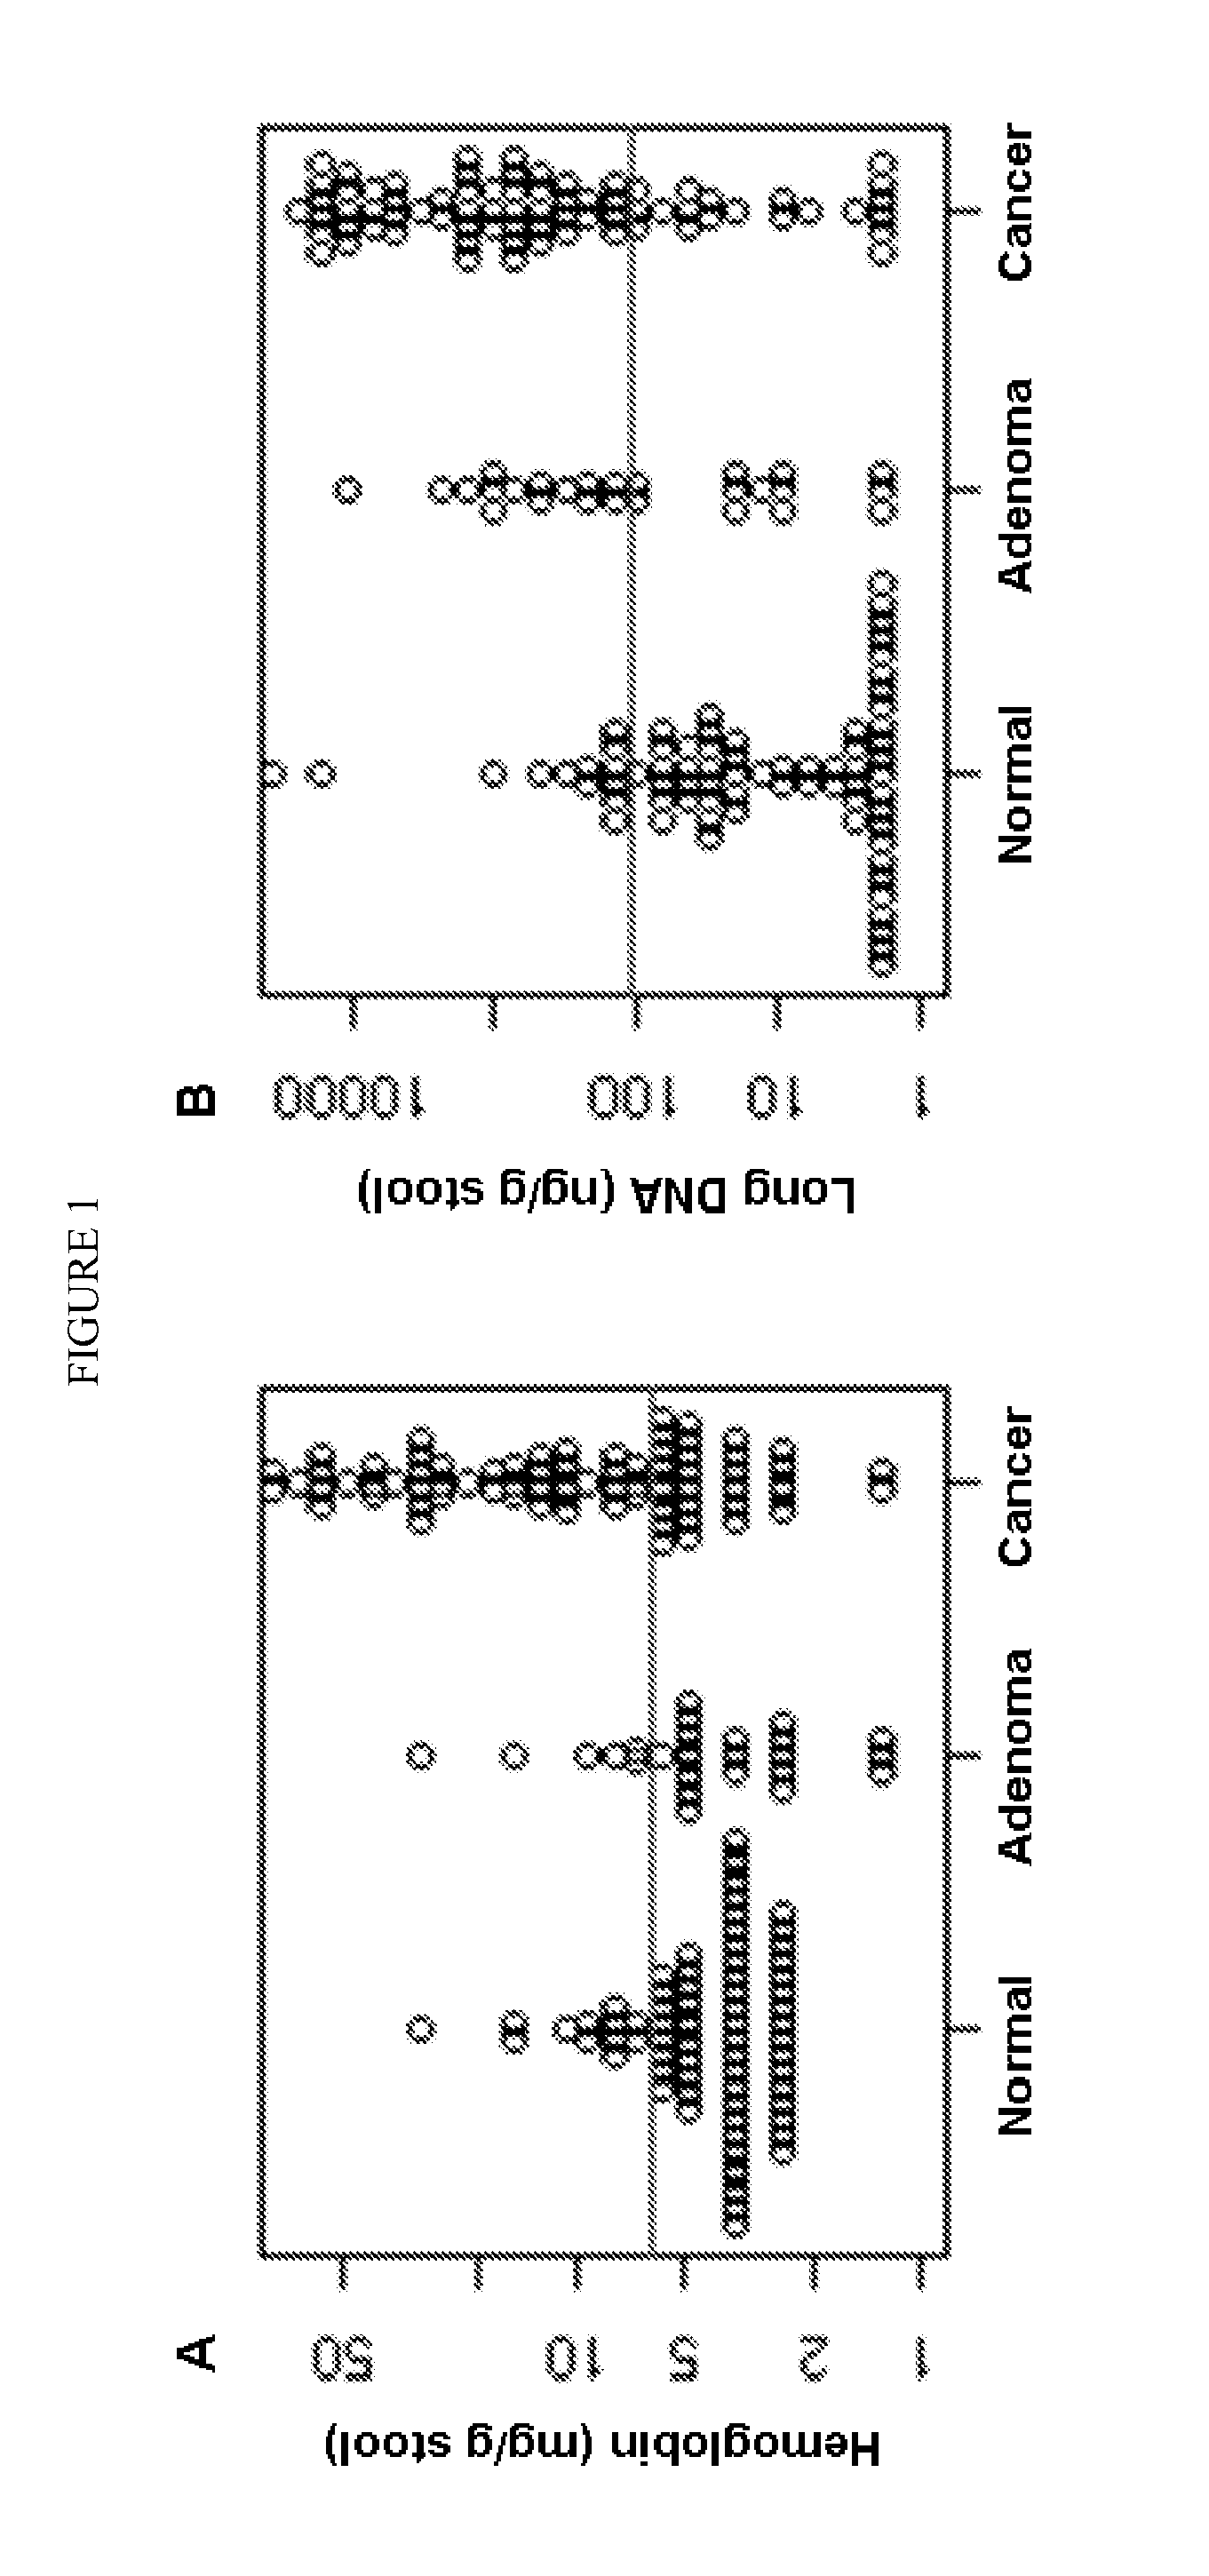 Methods and materials for detecting colorectal neoplasm